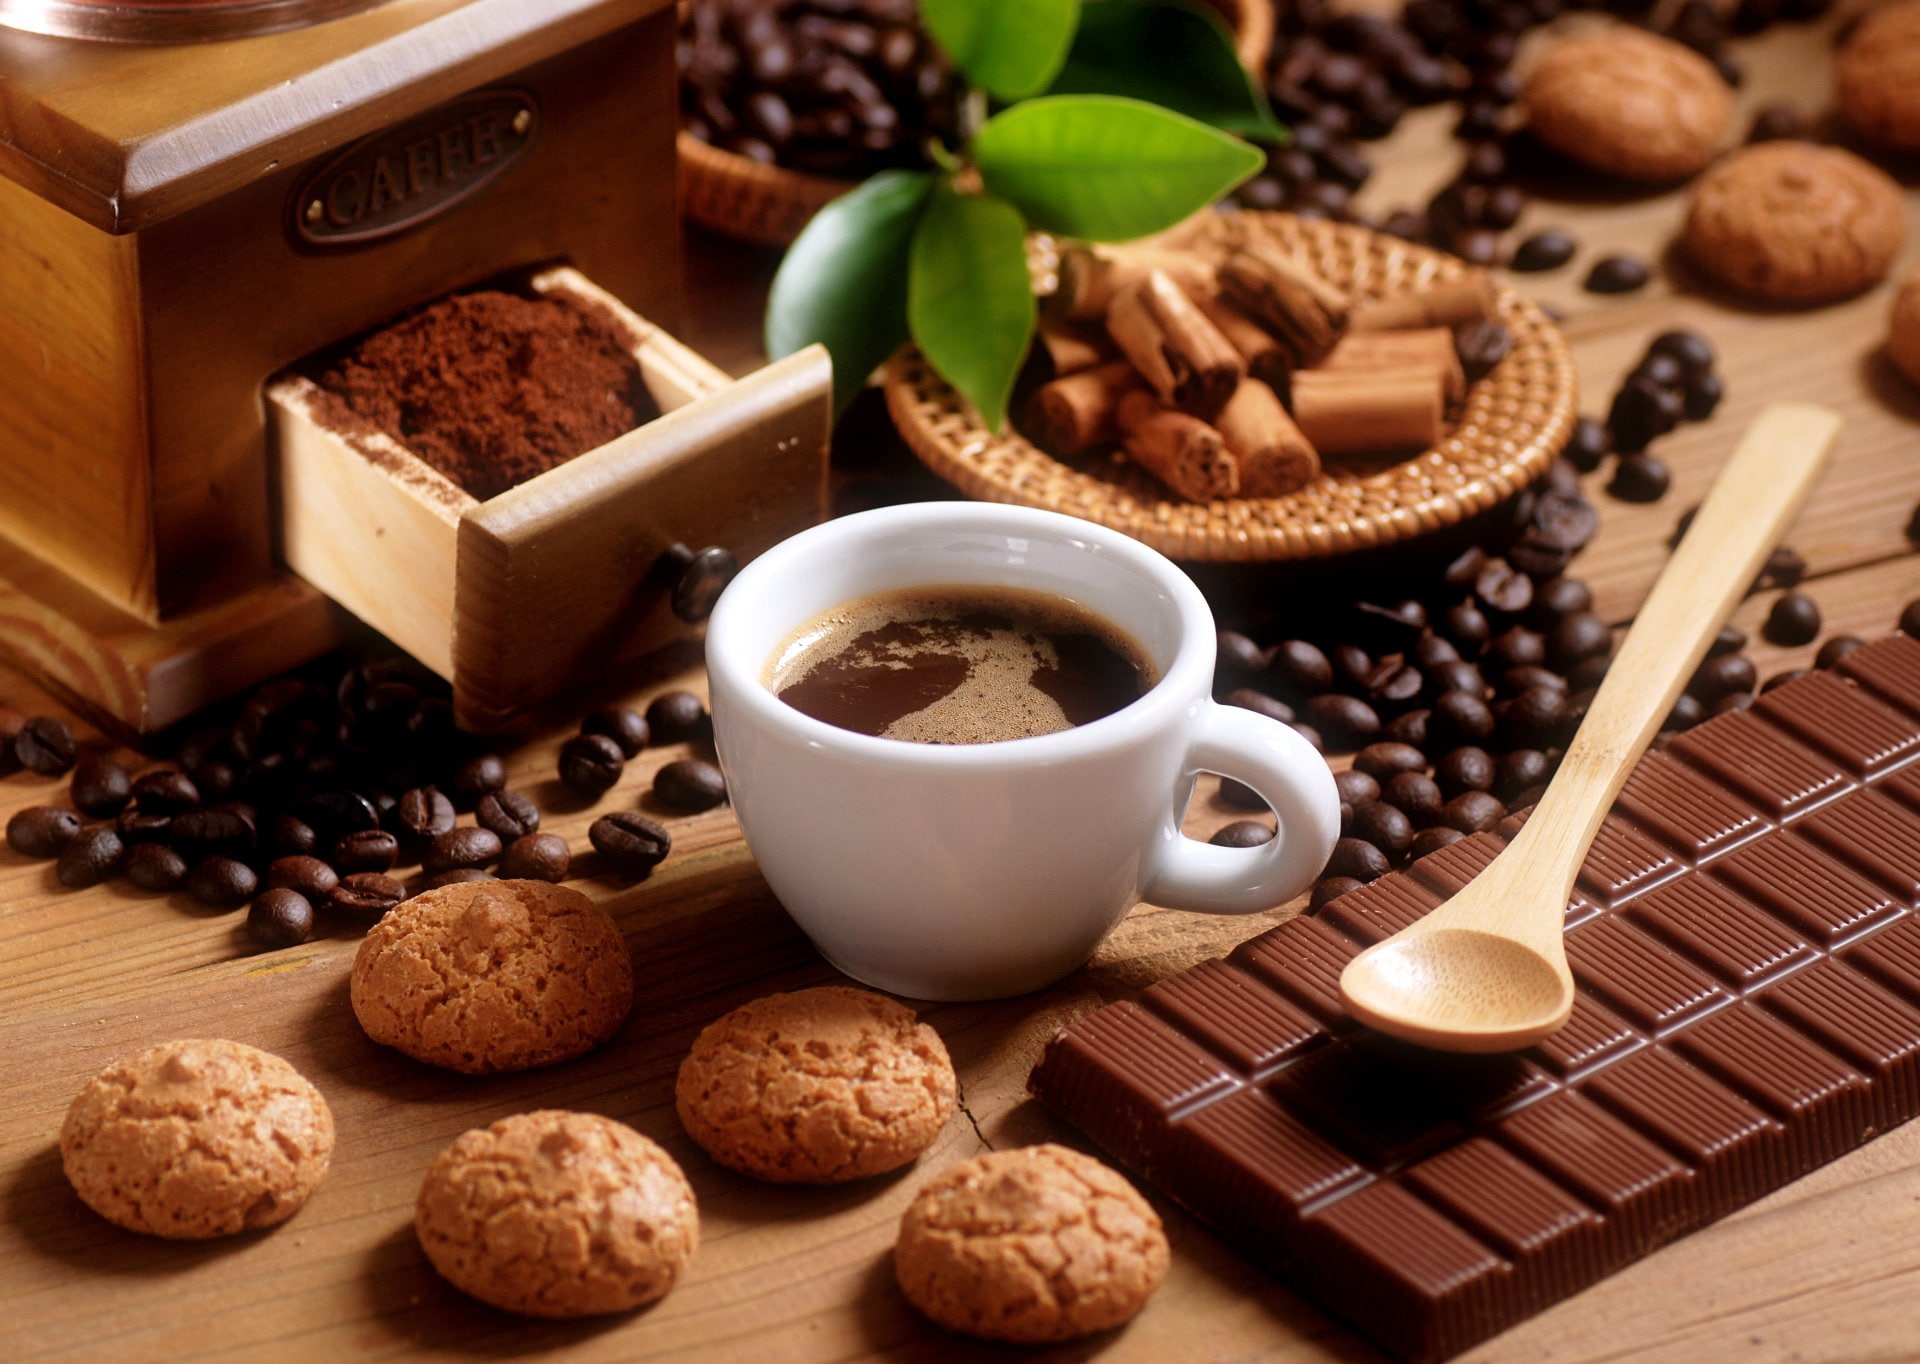 Food, Chocolate, Biscuit, Coffee, Coffee Beans, food and drink